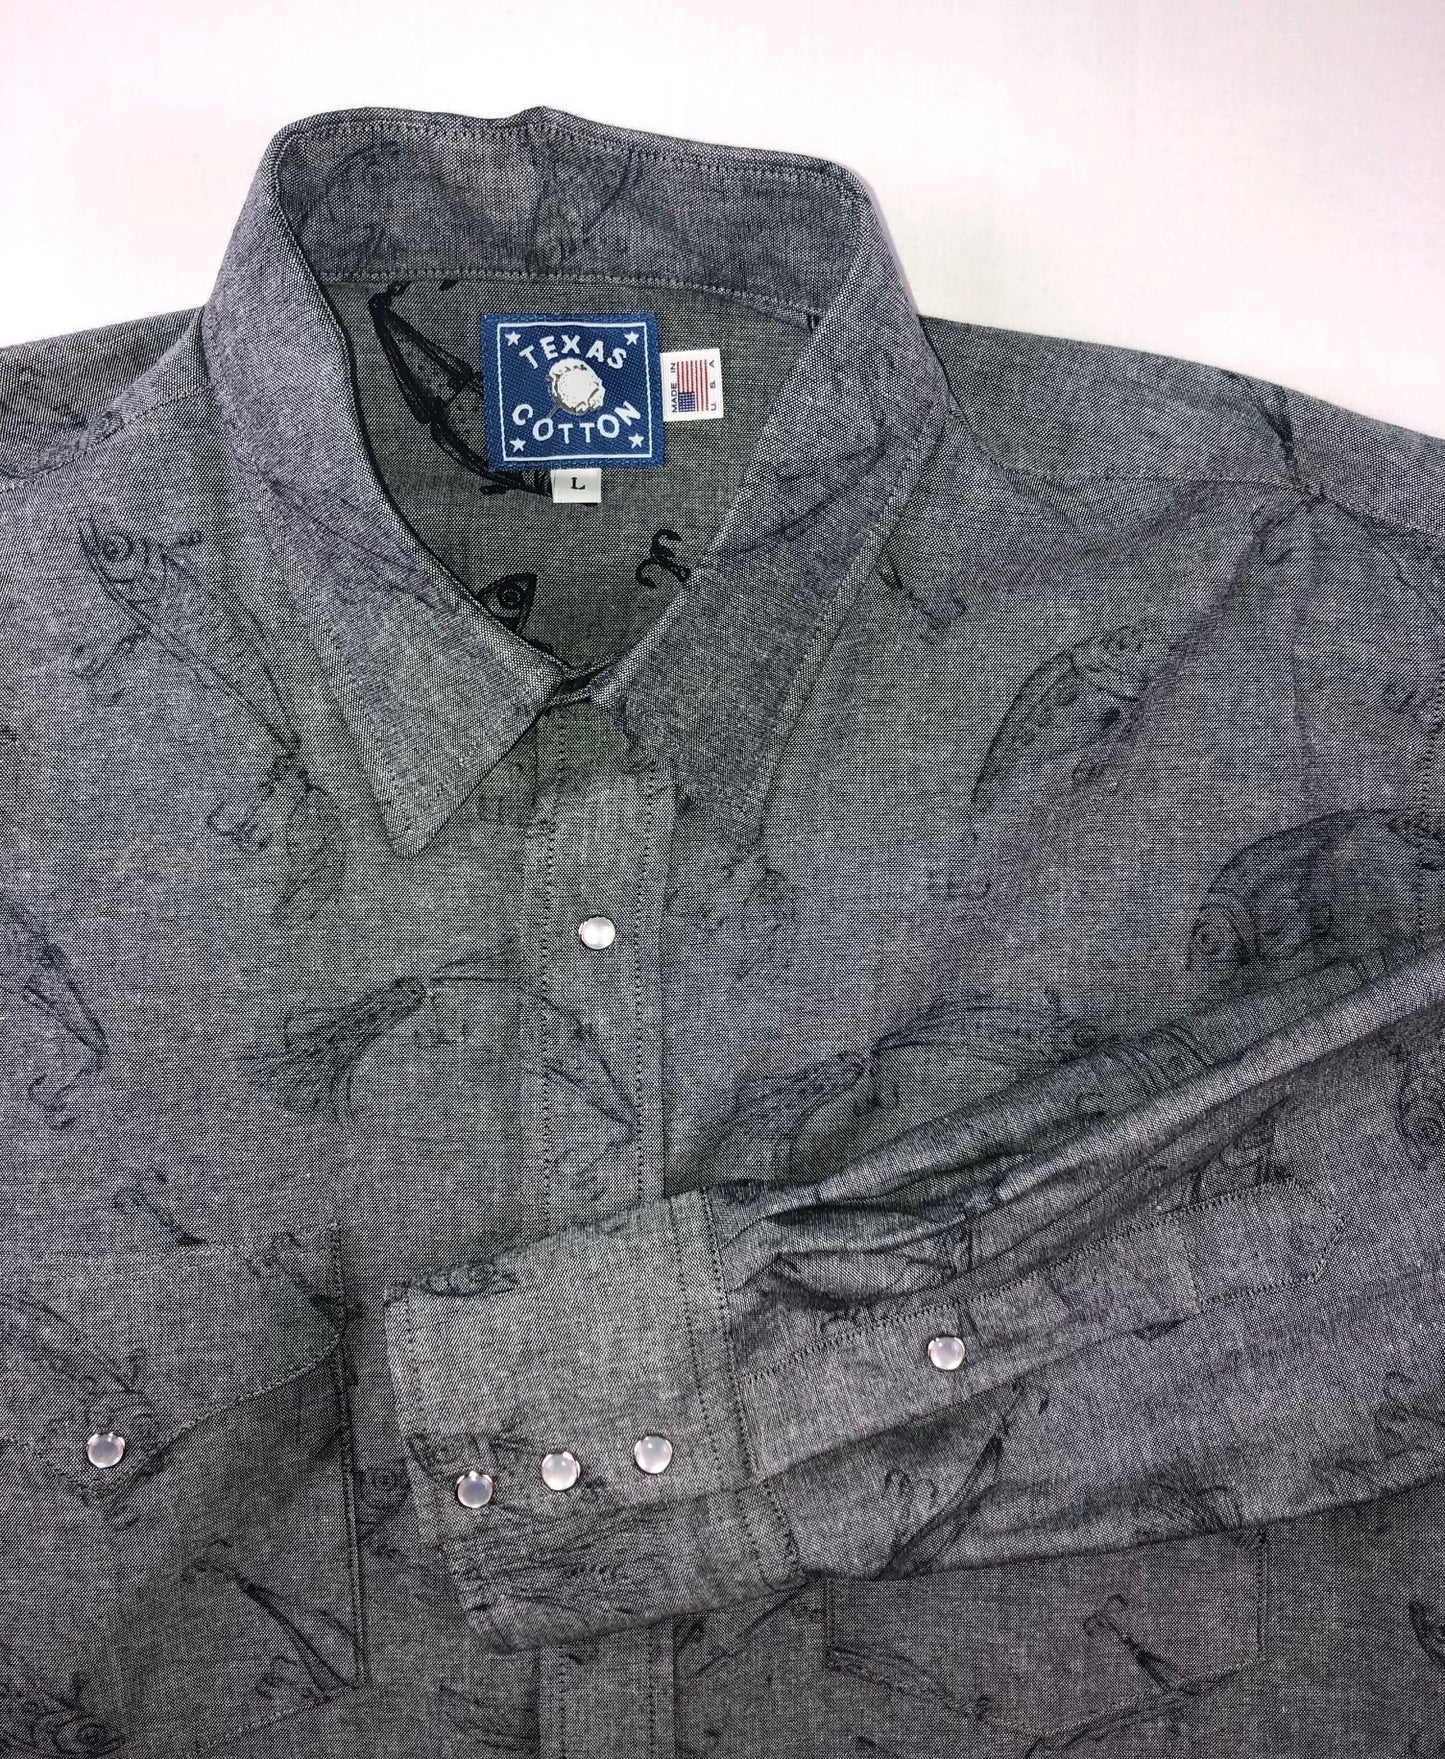 Factory Seconds - Slightly Irregular Shirts - Size Large or LT - 16/16.5 - From $19.95